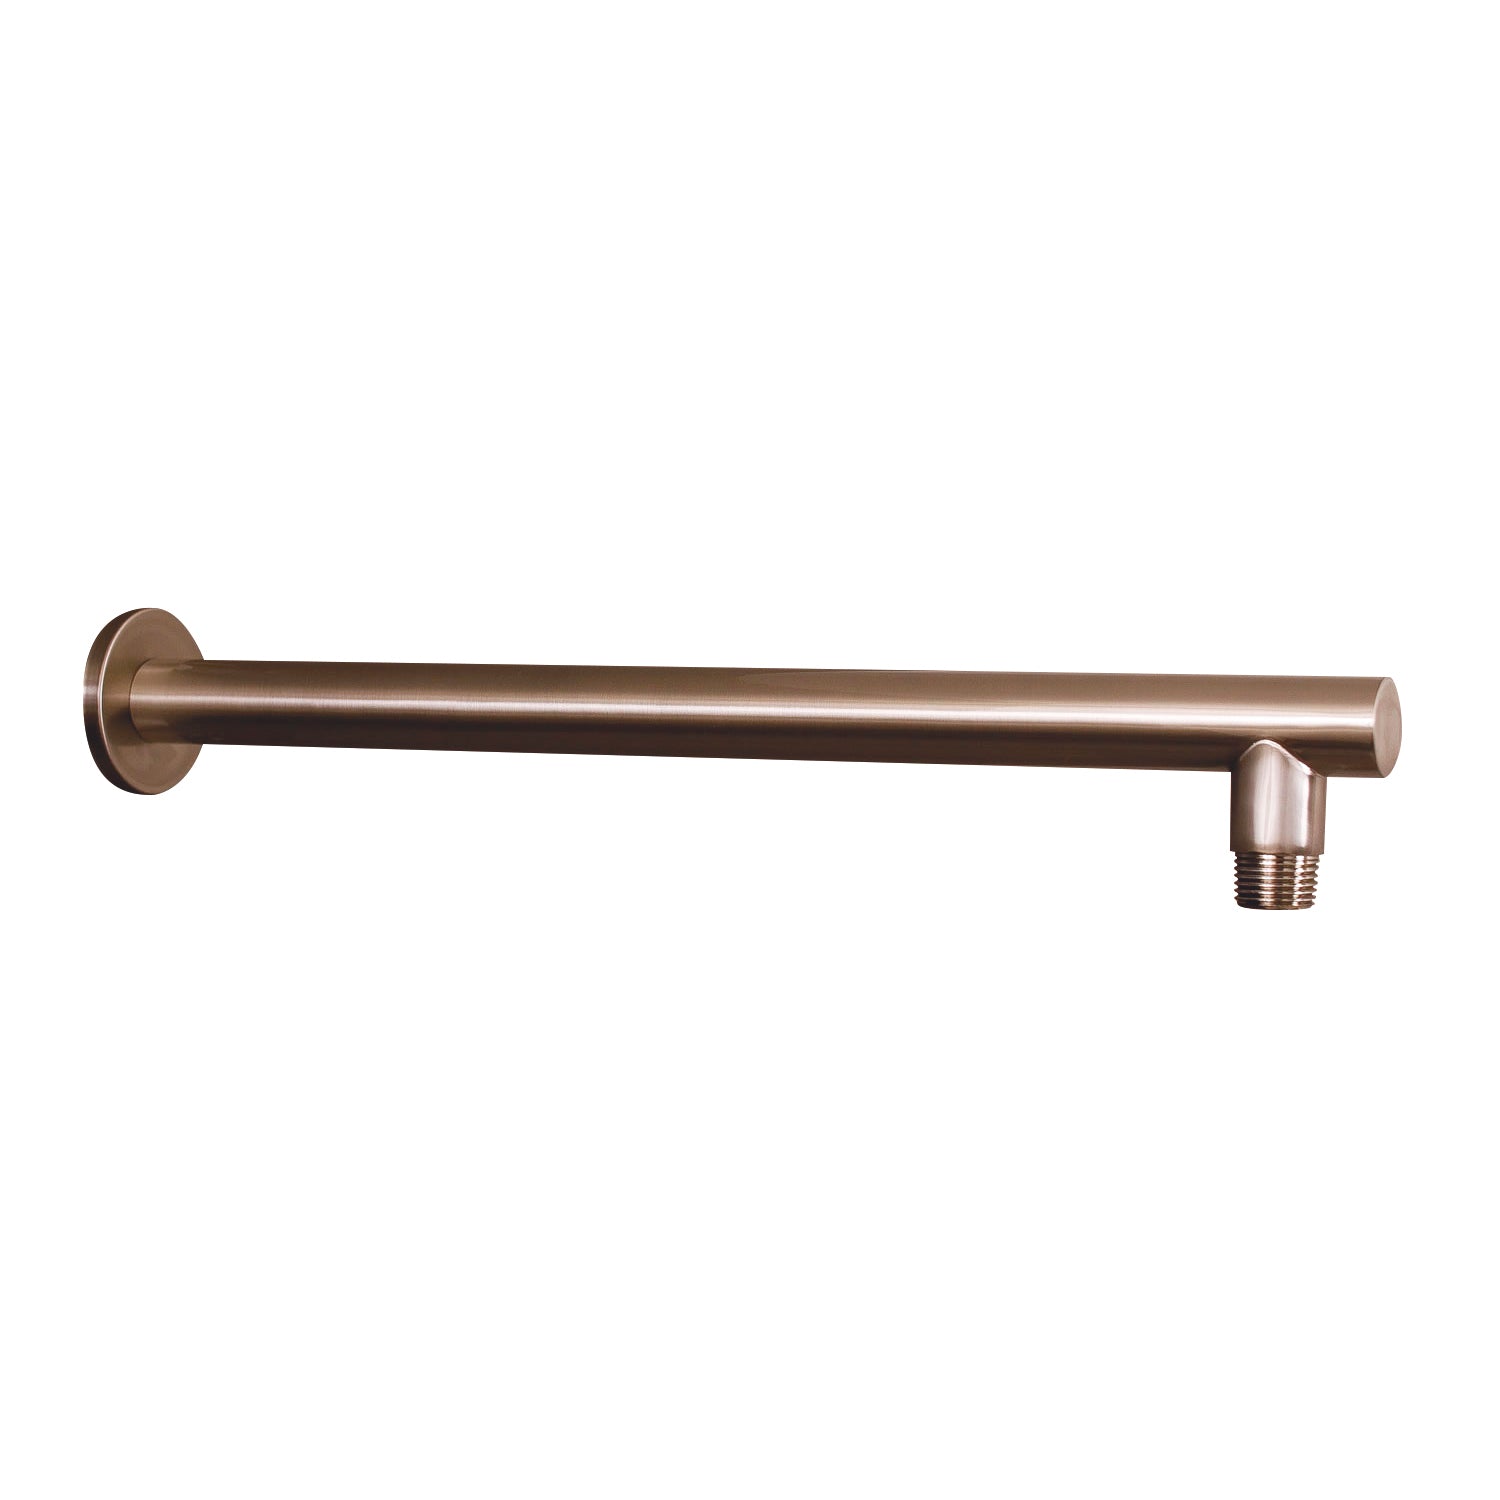 DAX Round Shower Arm, Spout, Brass Body, Wall Mount, Brushed Nickel Finish, 15 Inches (D-F04-15-BN)